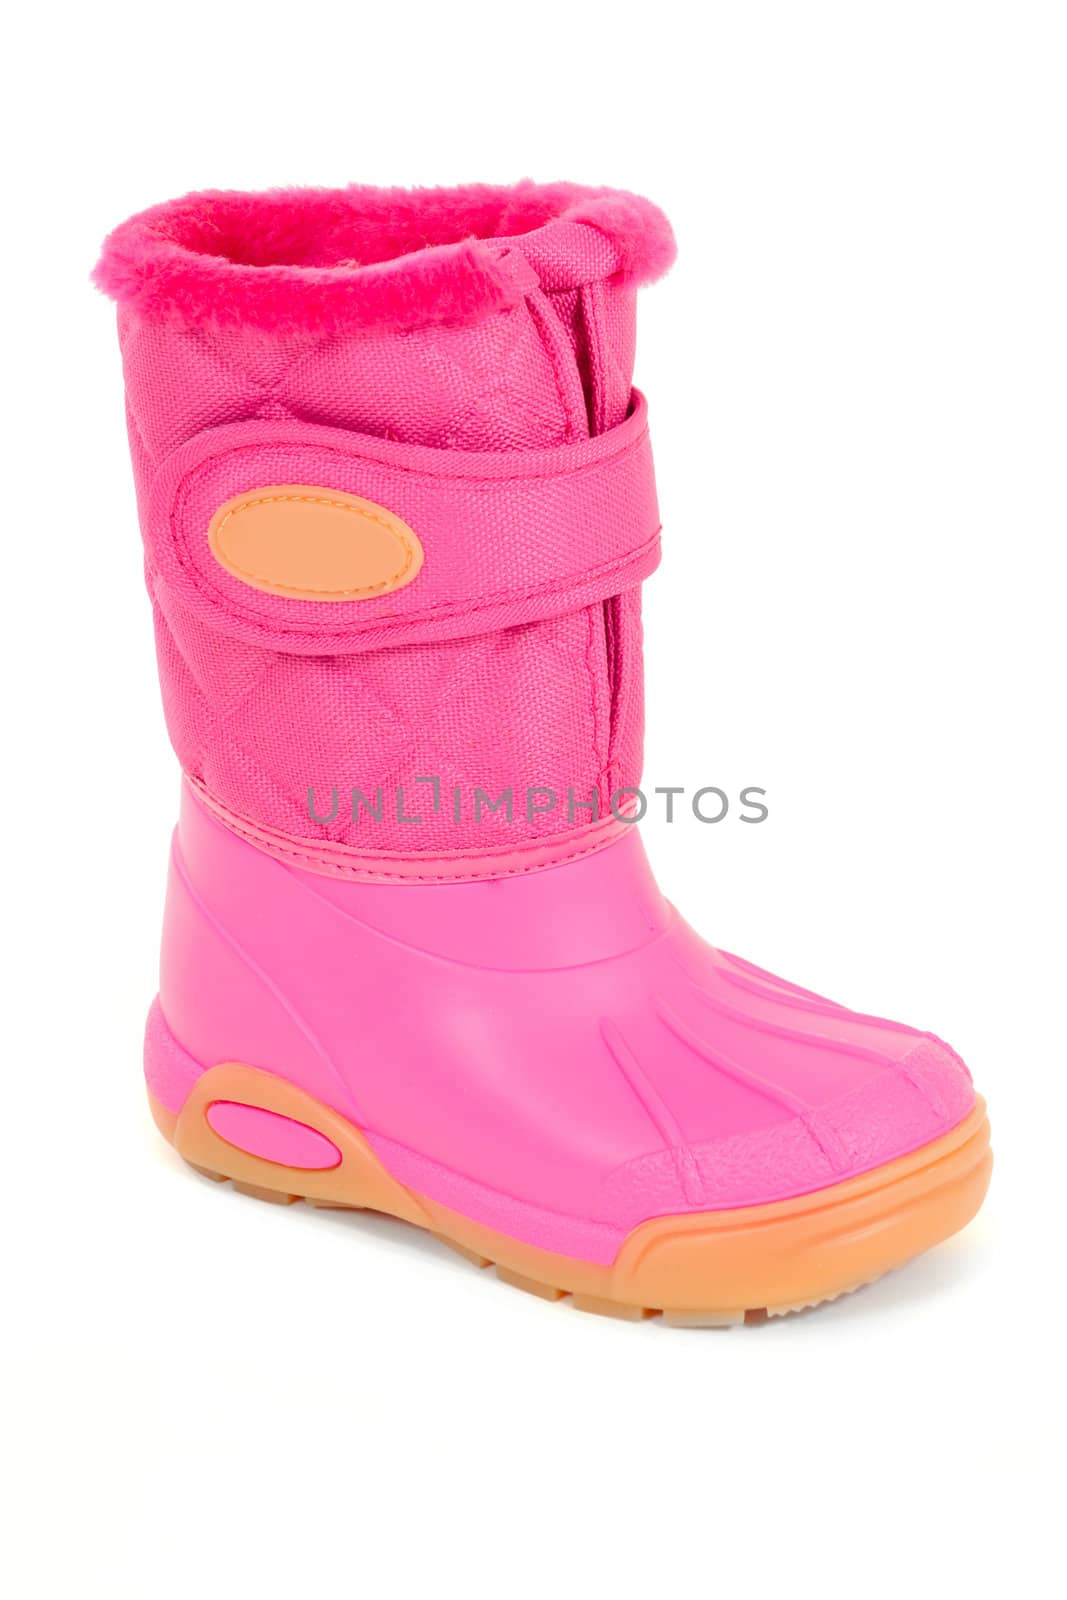 A pink winter boot taken on a white background.